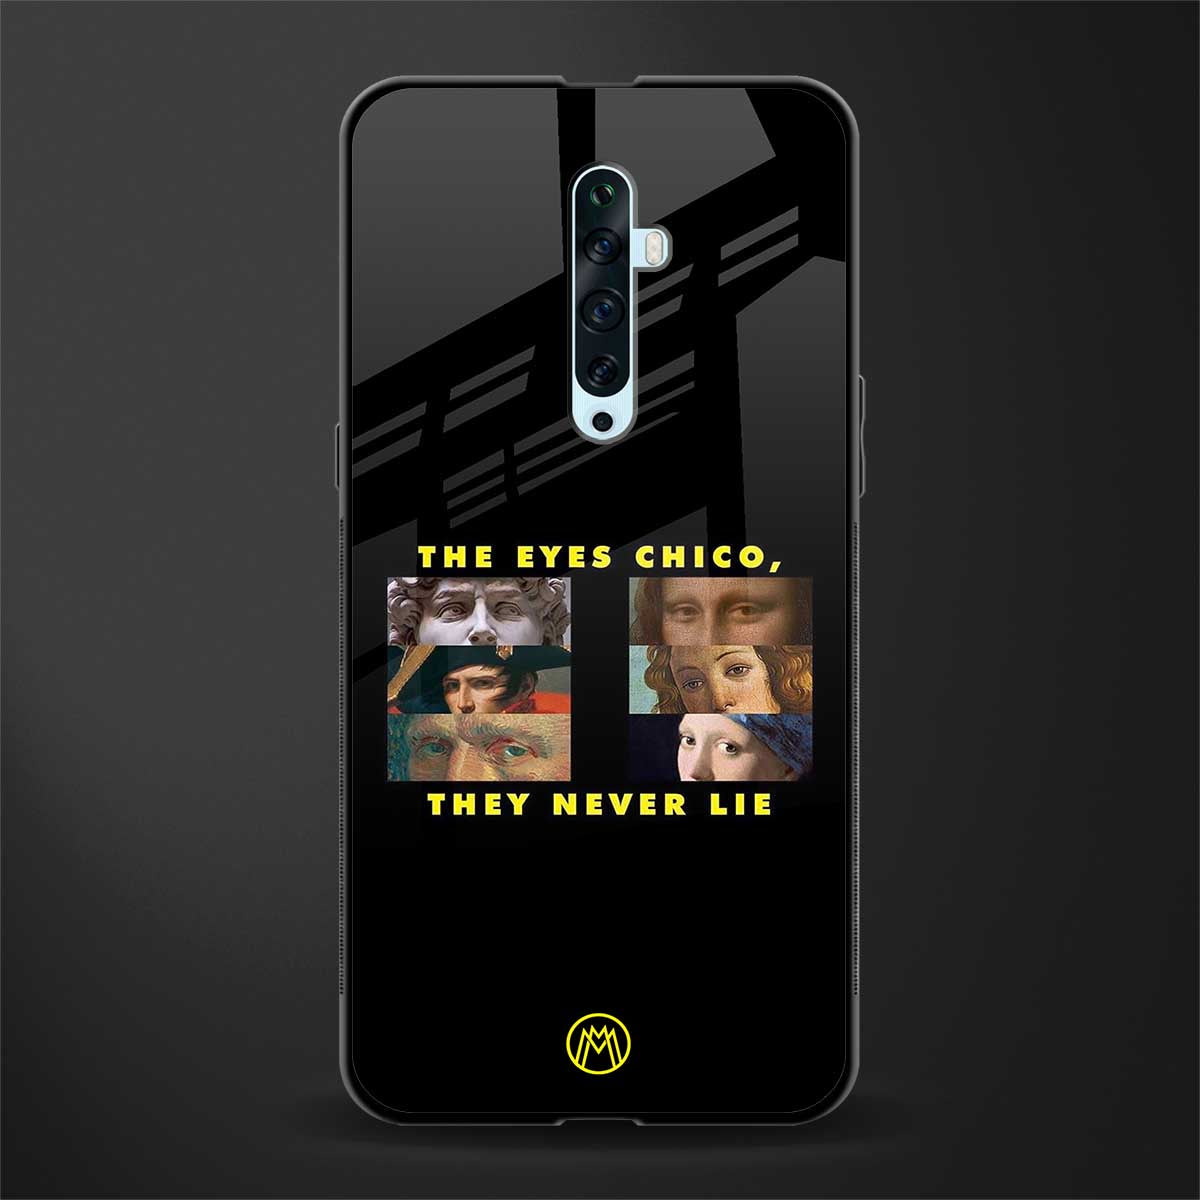 the eyes chico, they never lie movie quote glass case for oppo reno 2z image